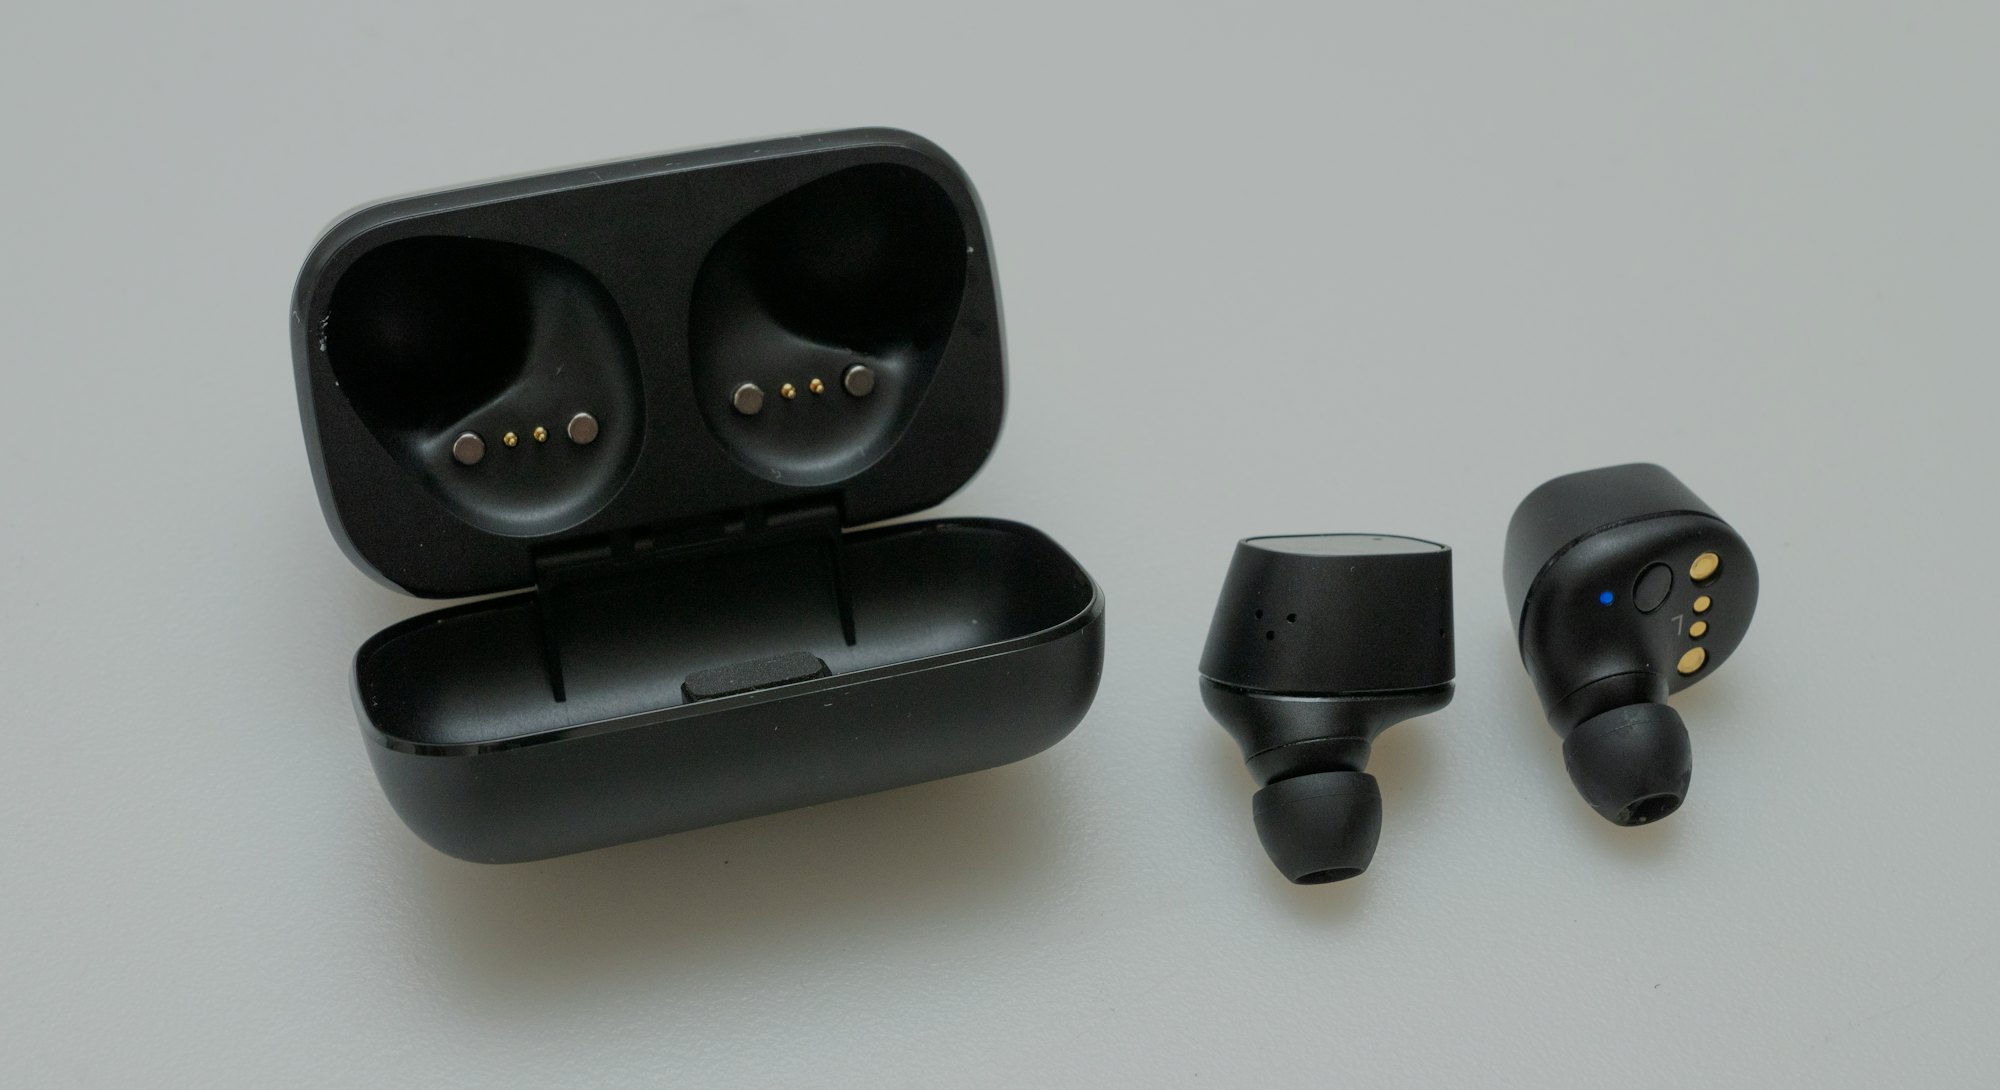 Sennheiser's CX Plus review, wireless earbuds and charging case